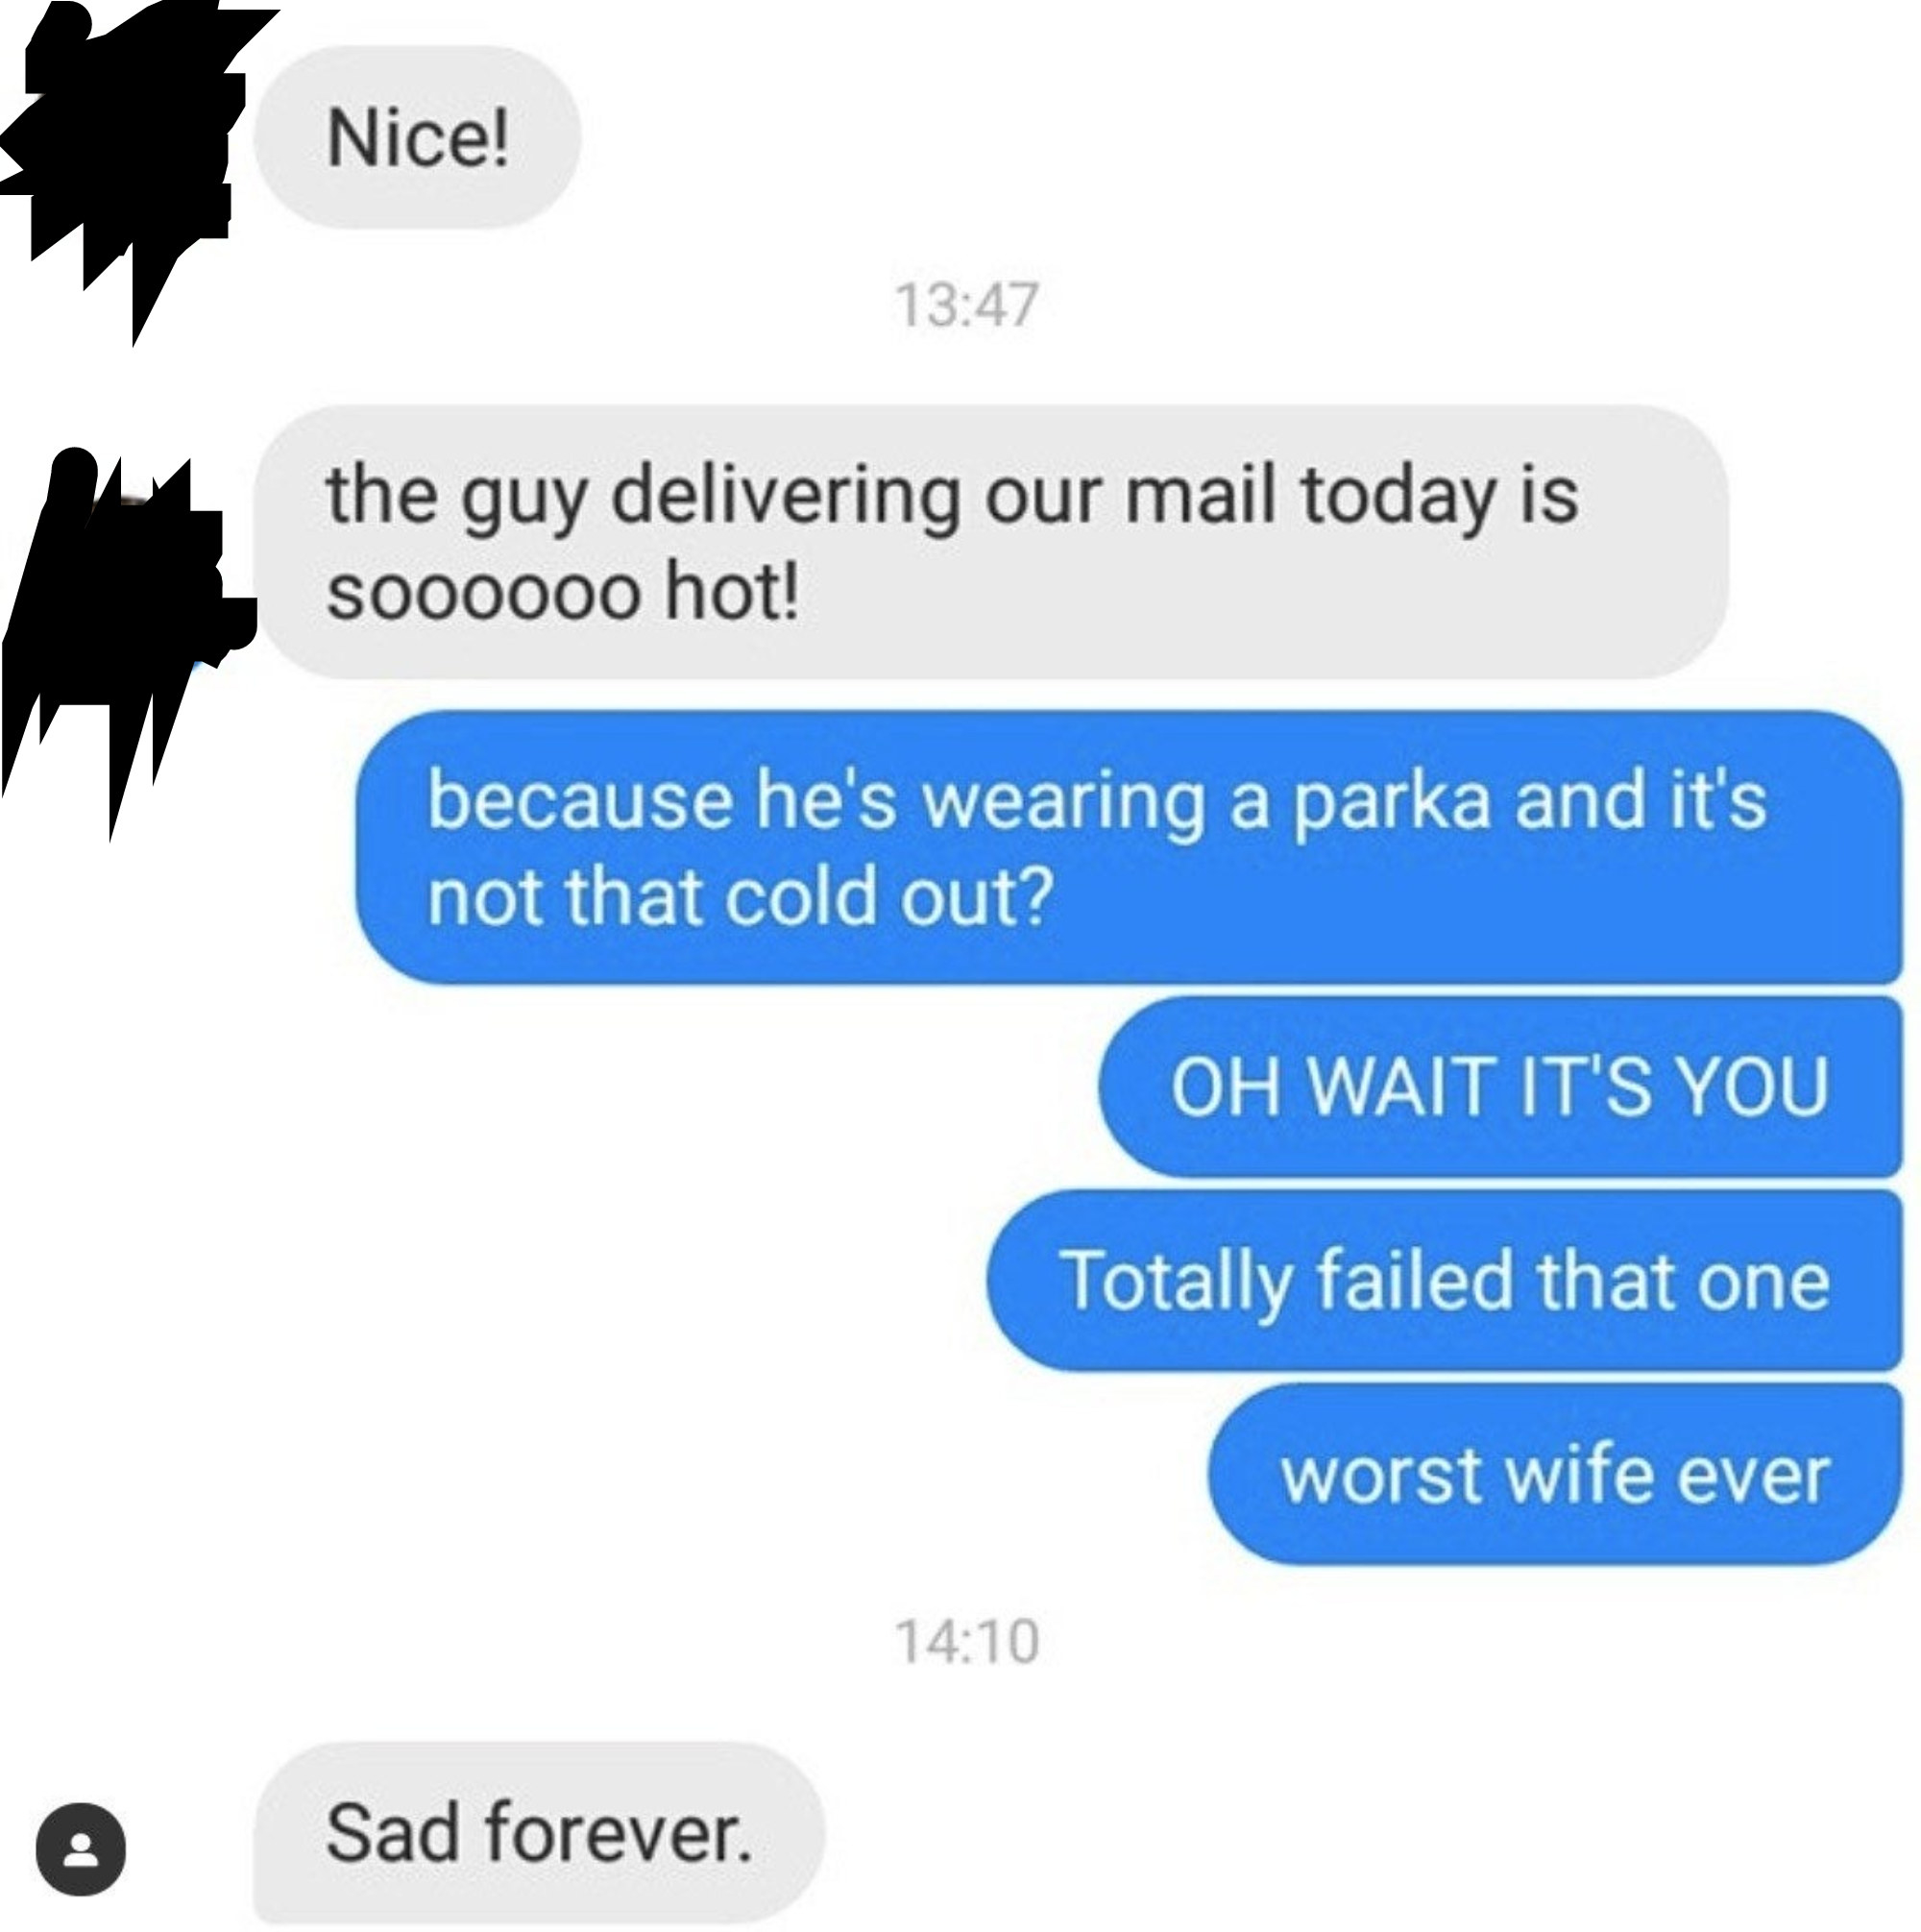 Wife says the guy delivering their mail is hot; husband asks if it&#x27;s because he&#x27;s wearing a parka and it&#x27;s not that cold out, then says &quot;Oh wait it&#x27;s you&quot; and &quot;worst wife ever&quot;